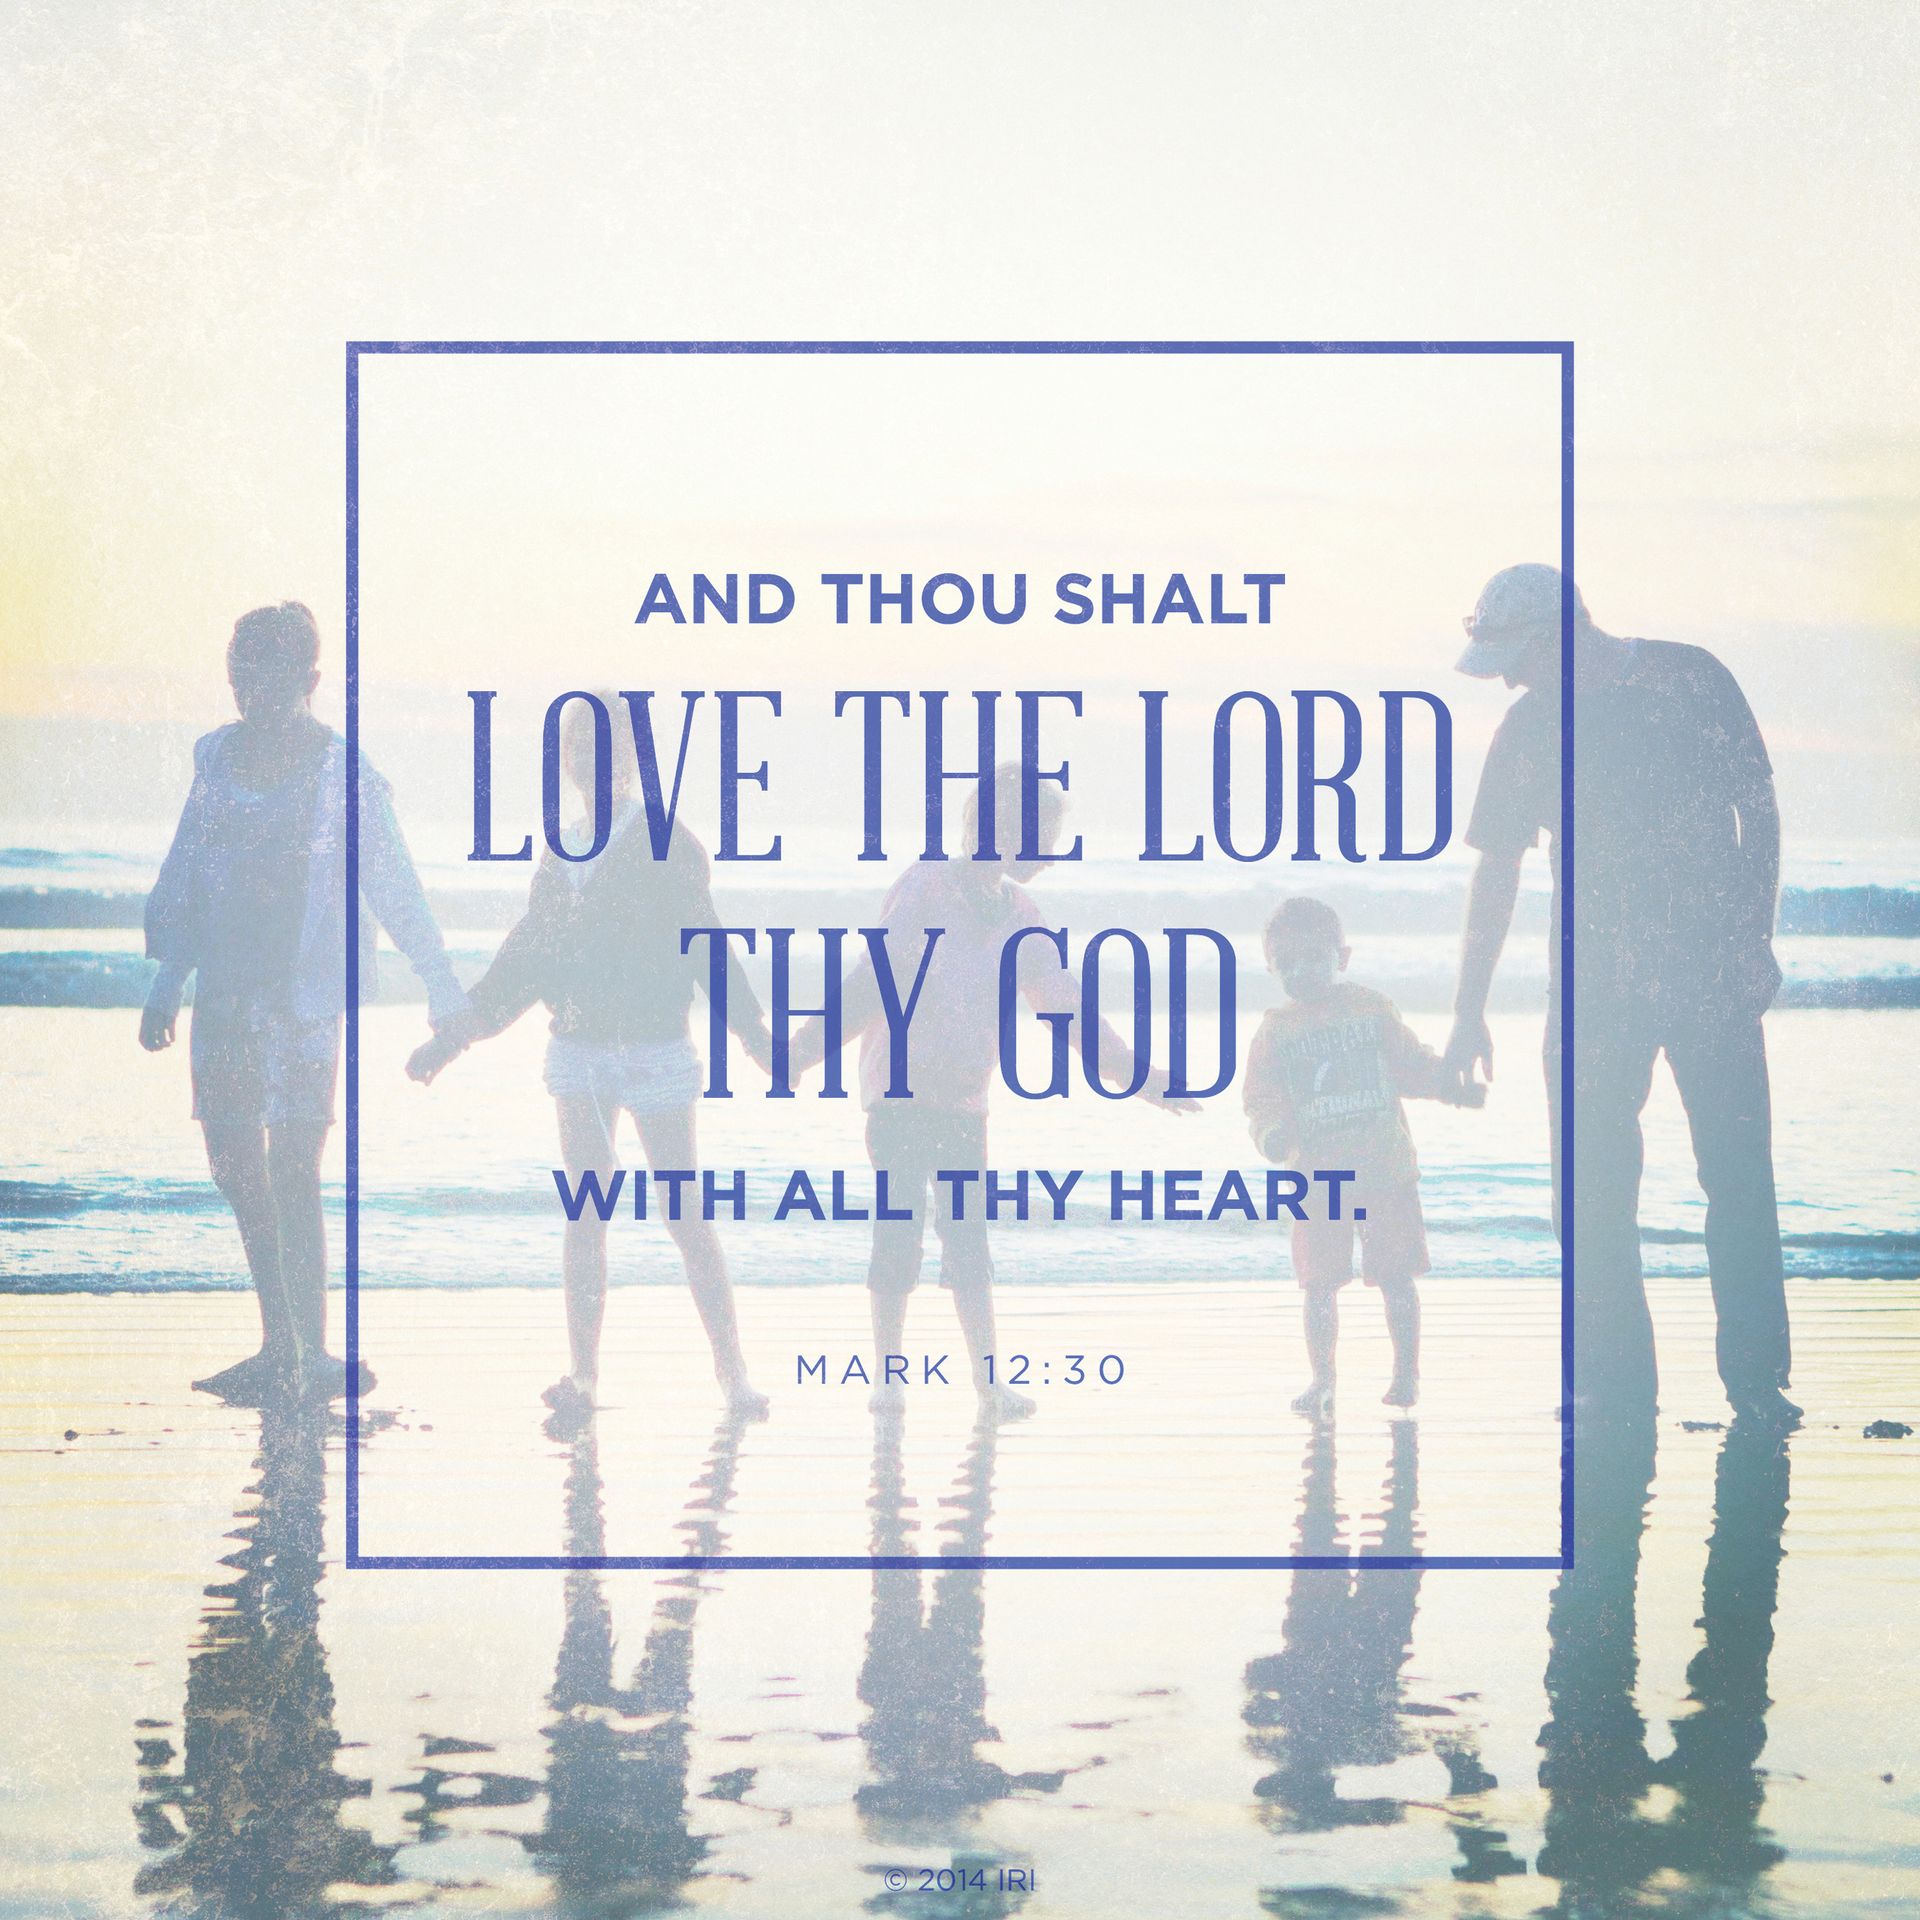 “And thou shalt love the Lord thy God with all thy heart.”—Mark 12:30